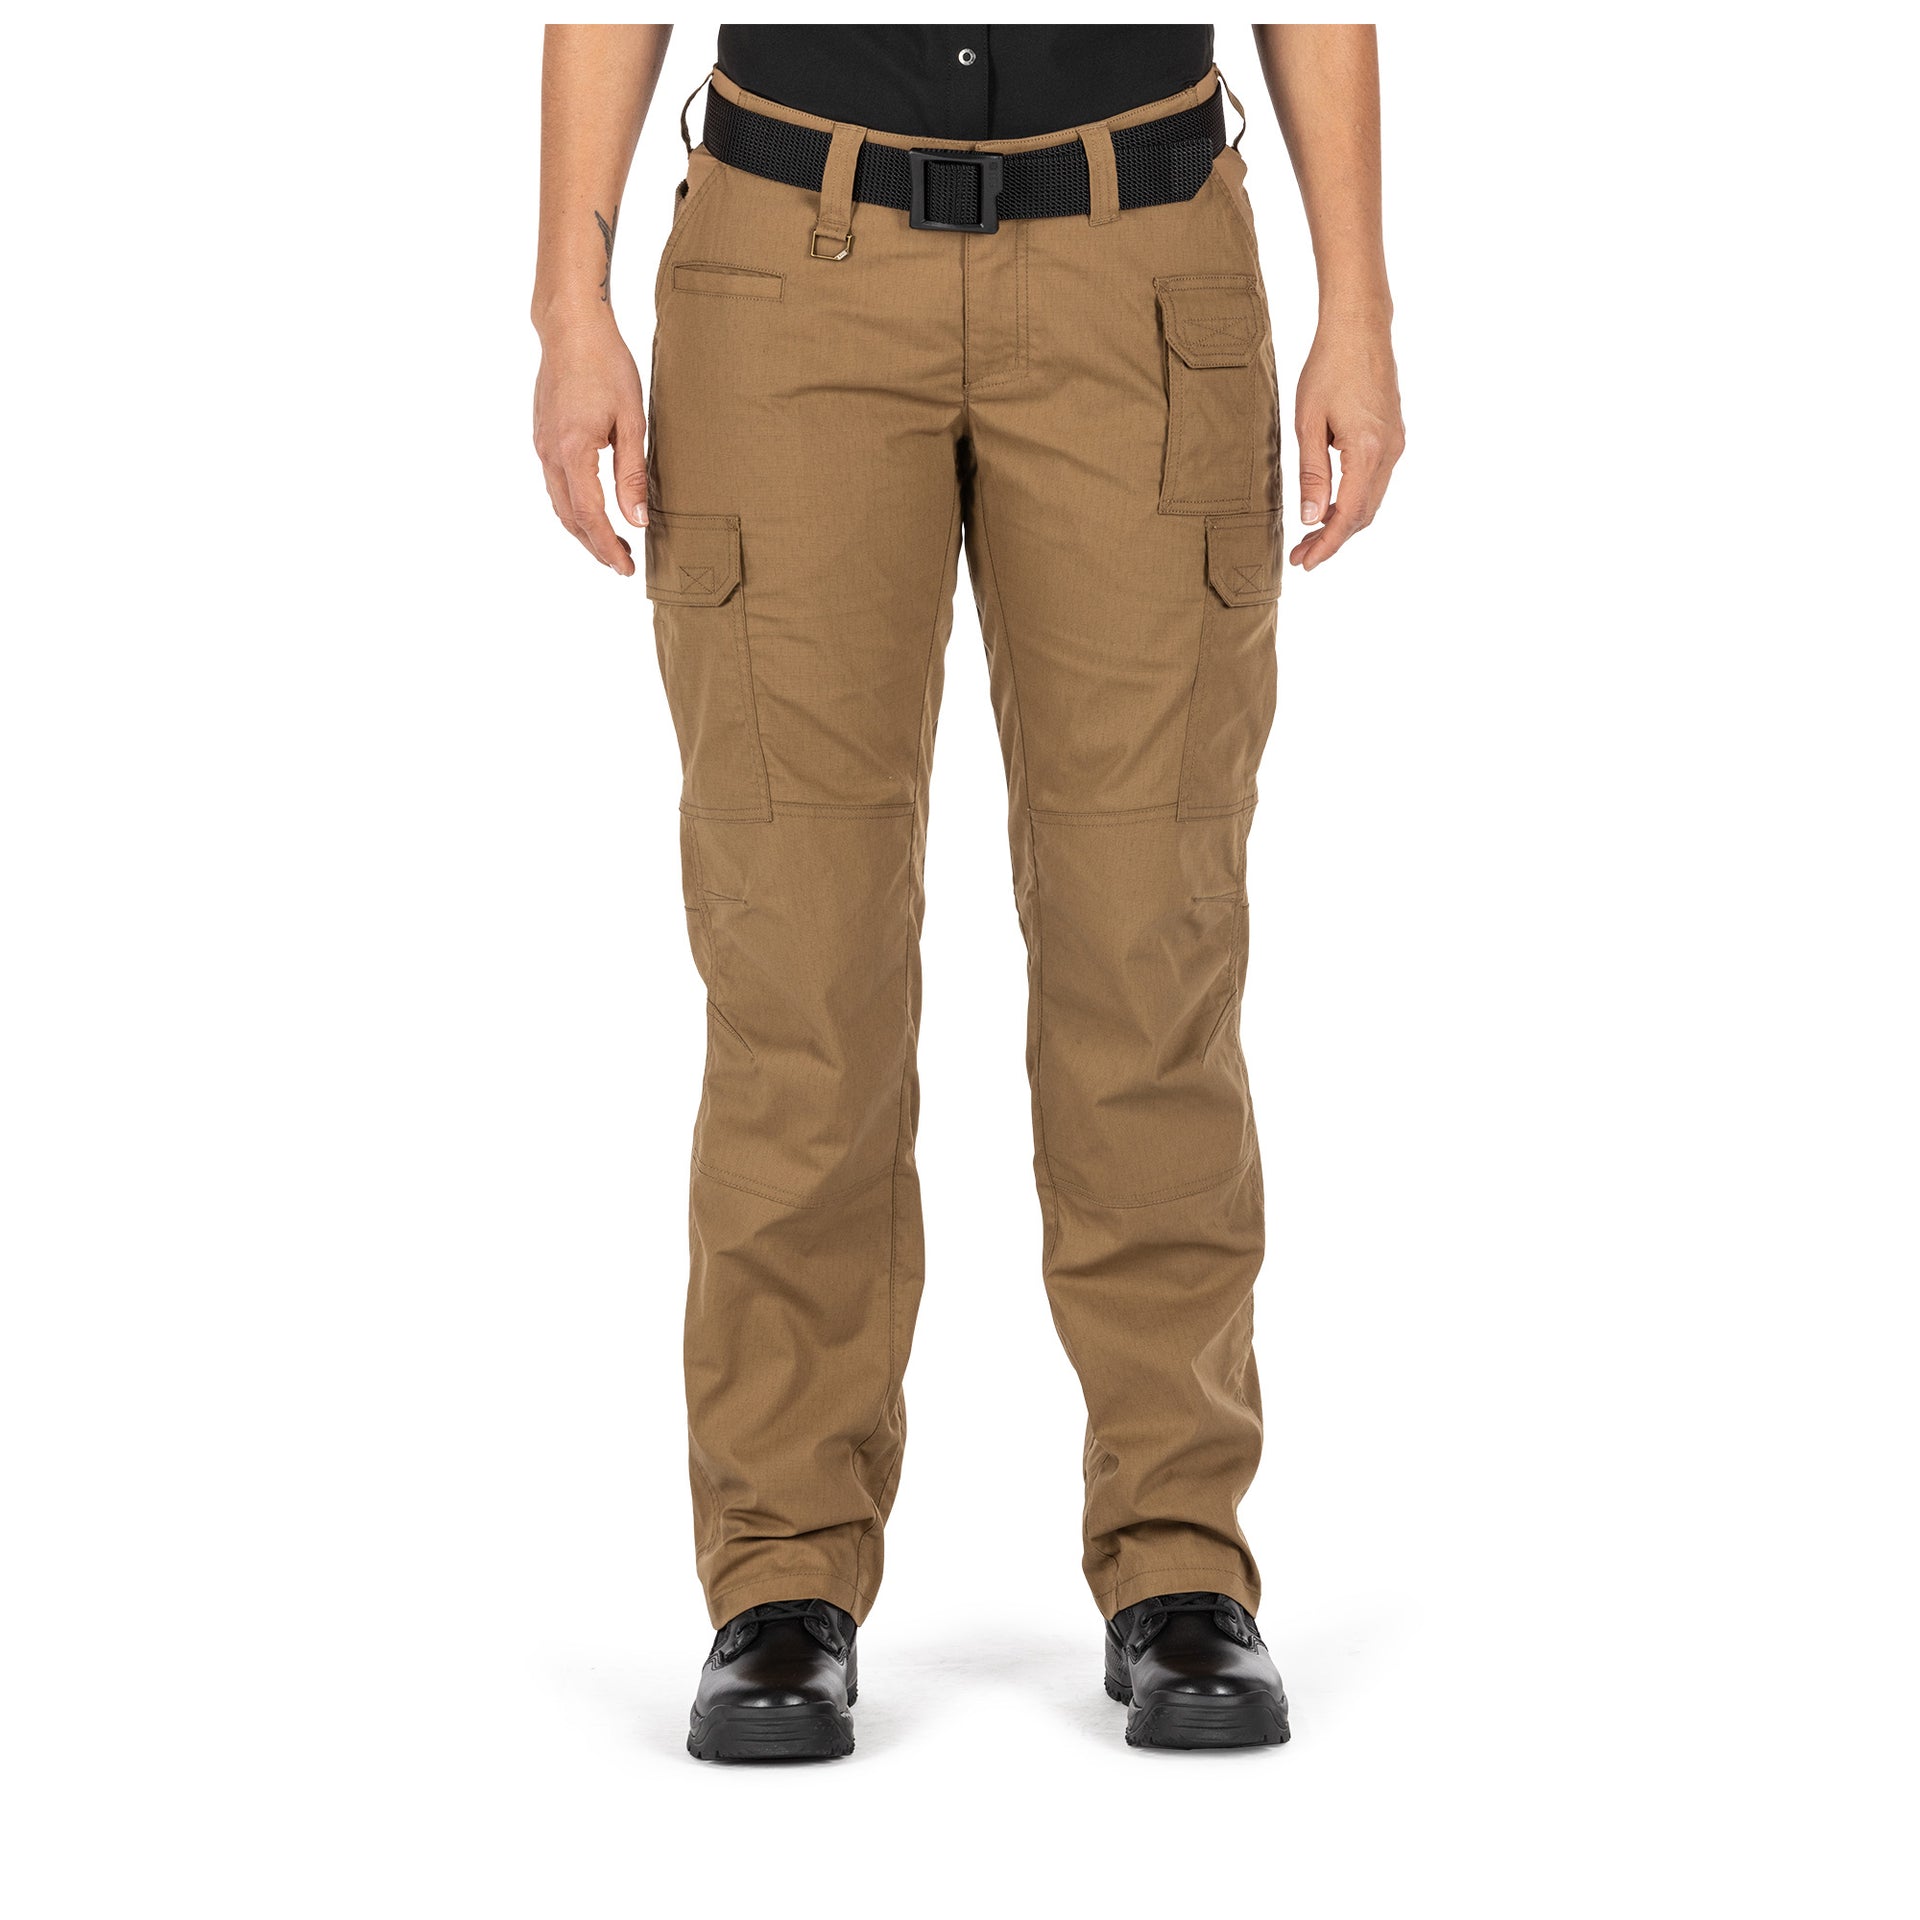 5.11 Tactical Women's ABR™ Pro Pant (64445) | FREE SHIPPING | Manufactured with durable, extremely lightweight FlexLite™ stretch ripstop fabric with a Teflon™ finish, the Women’s ABR Pro Pant is reinforced at strategic locations throughout and is knee pad ready. 